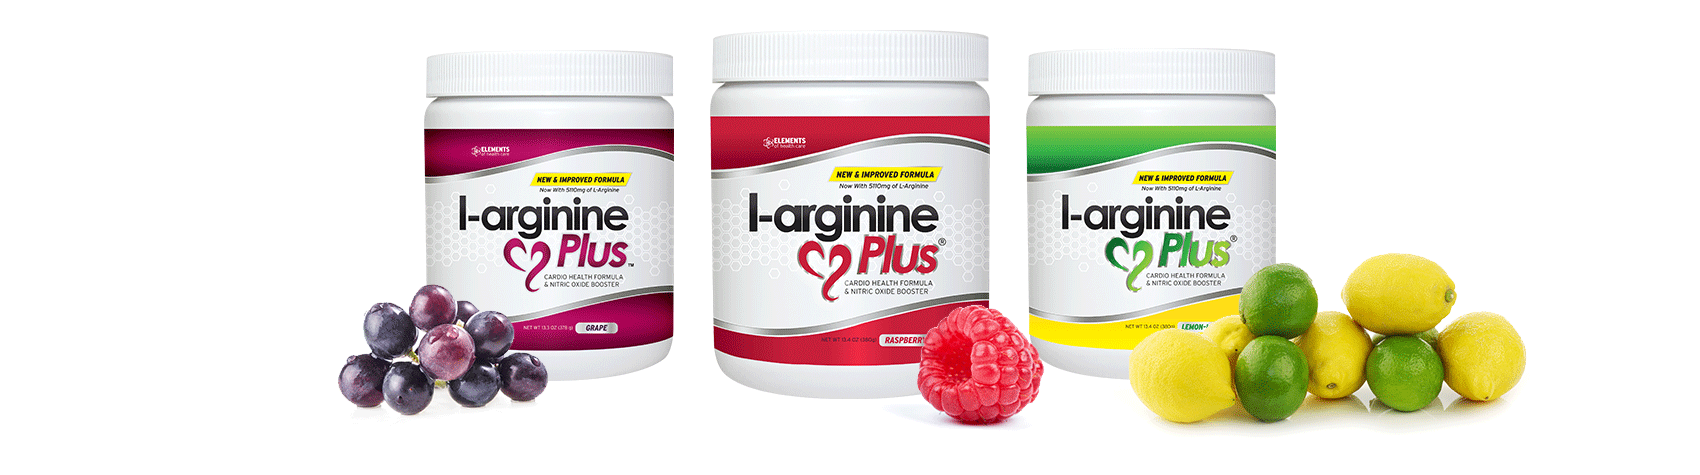 L-Arginine Plus is the Best There Is